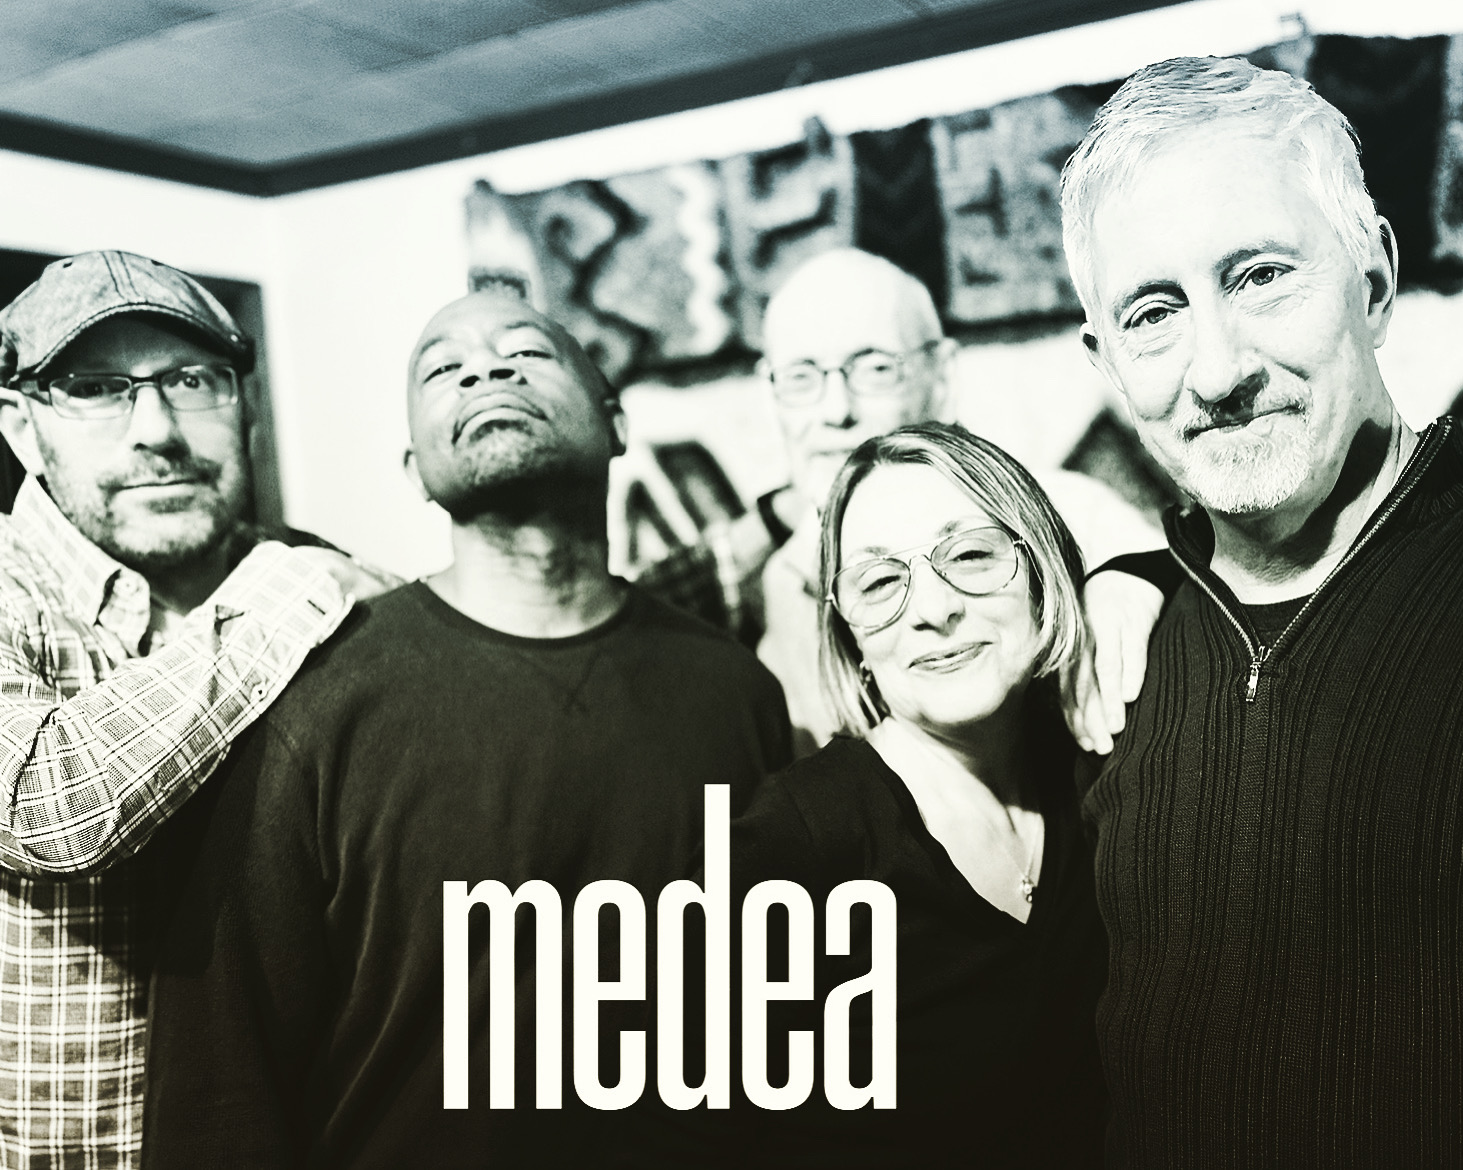 FRI. NOV. 17: Medea: The Miracle Line 20th Anniversary & New EP Release Show w/special guest The Michele Show